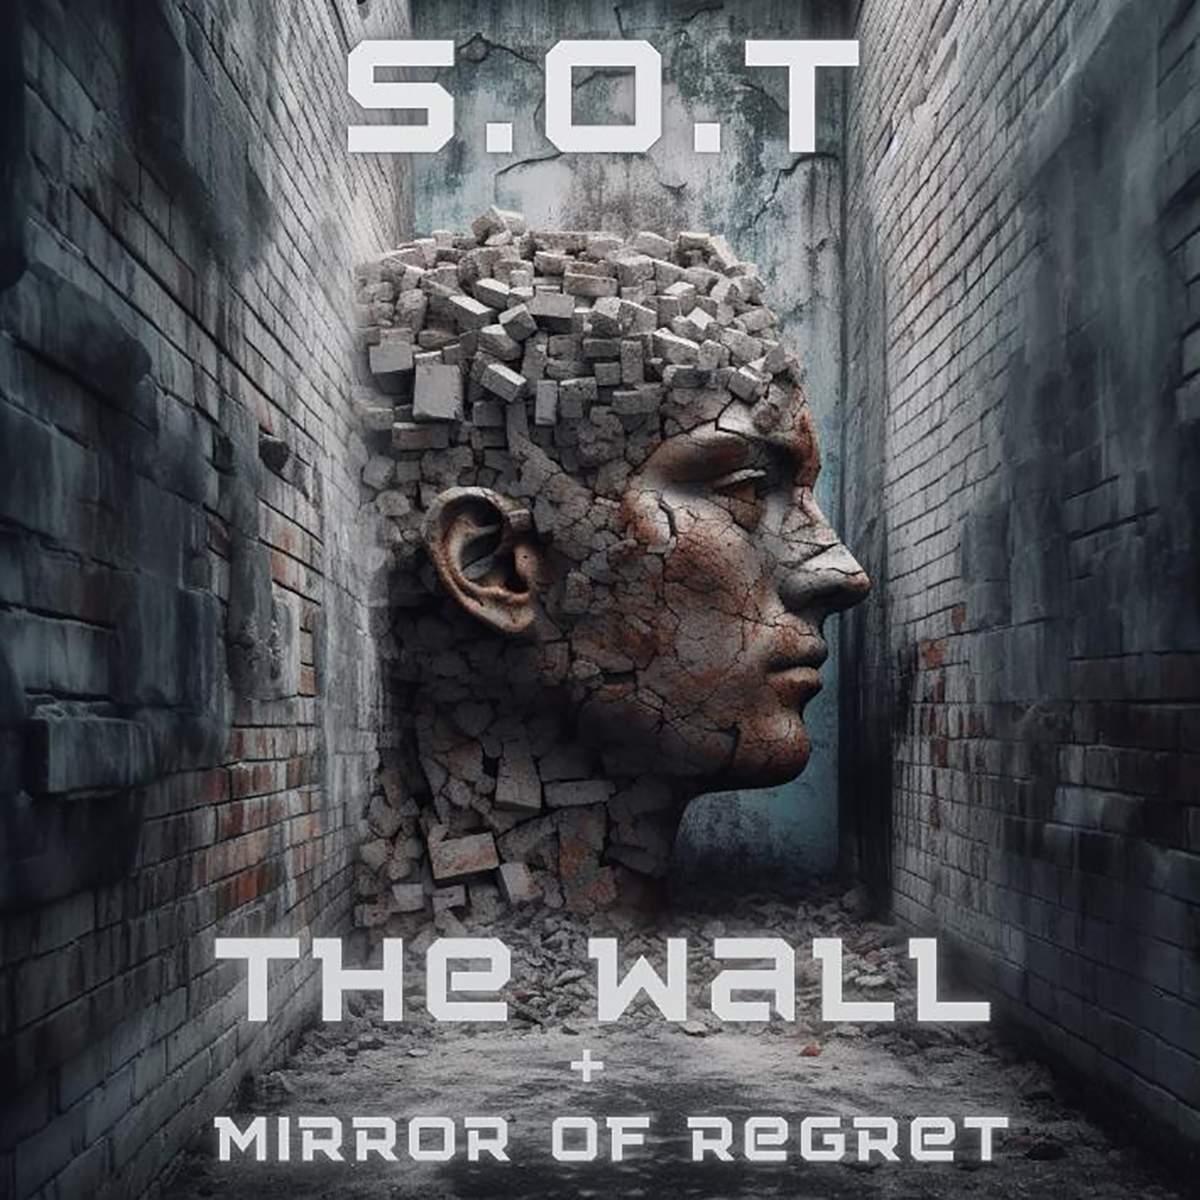 Stage of Theed – The Wall